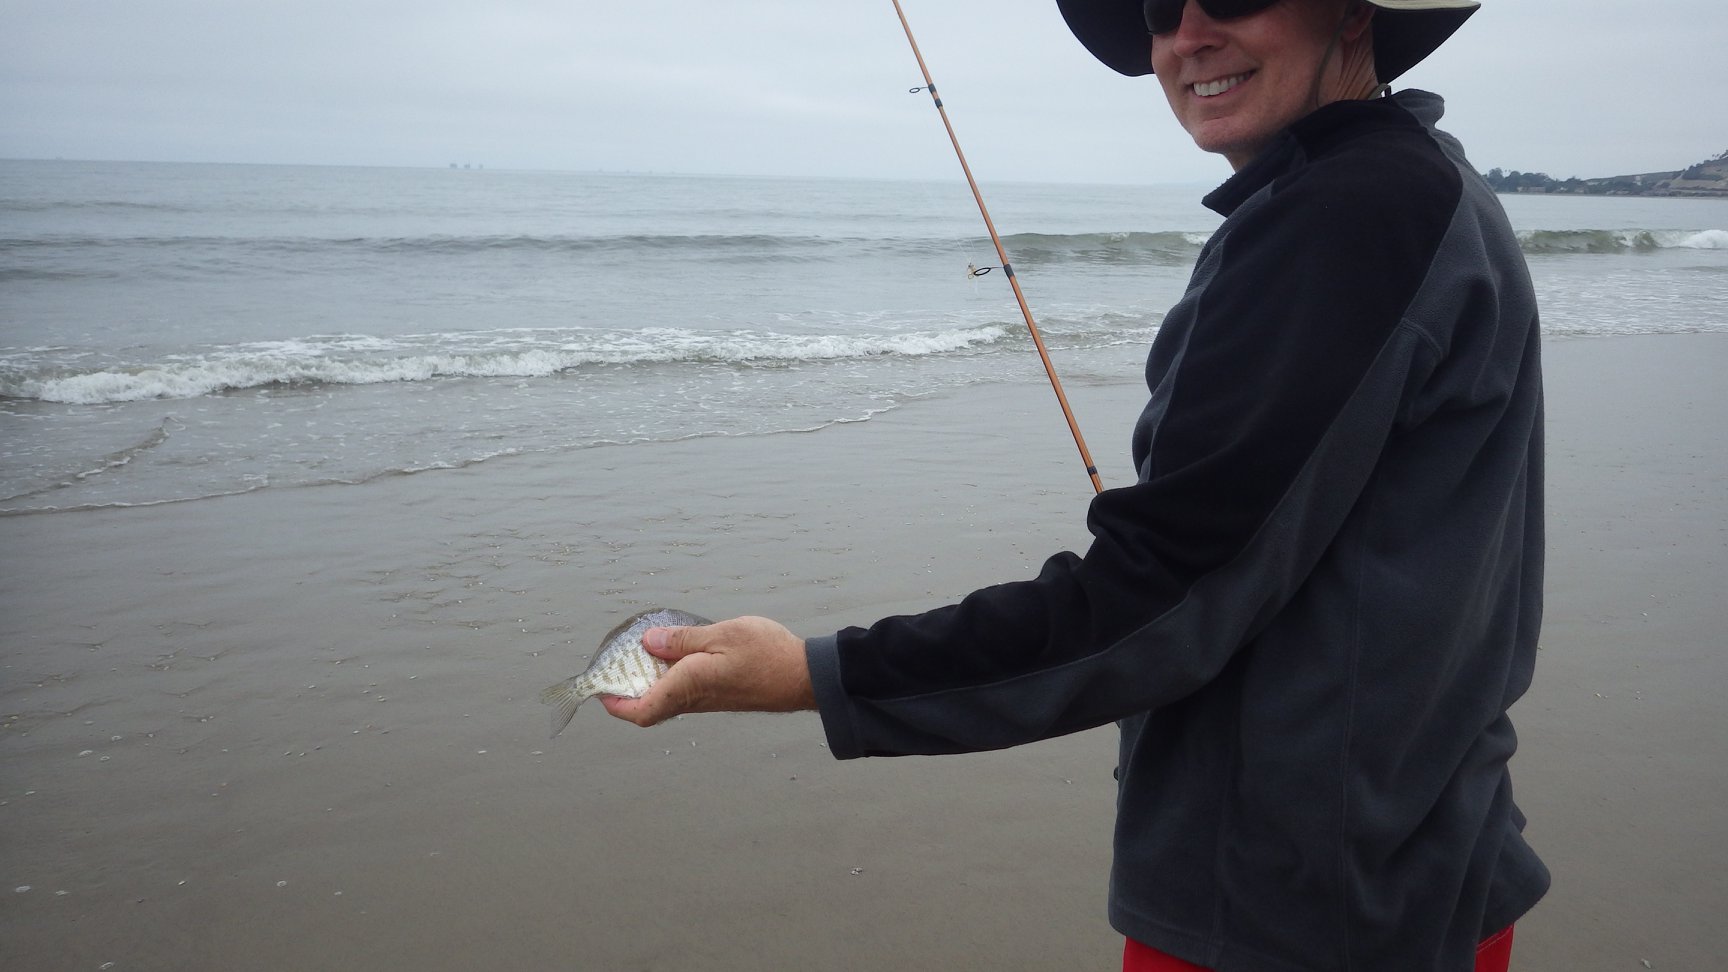 Fly Fish The Surf 7-22-2019 2